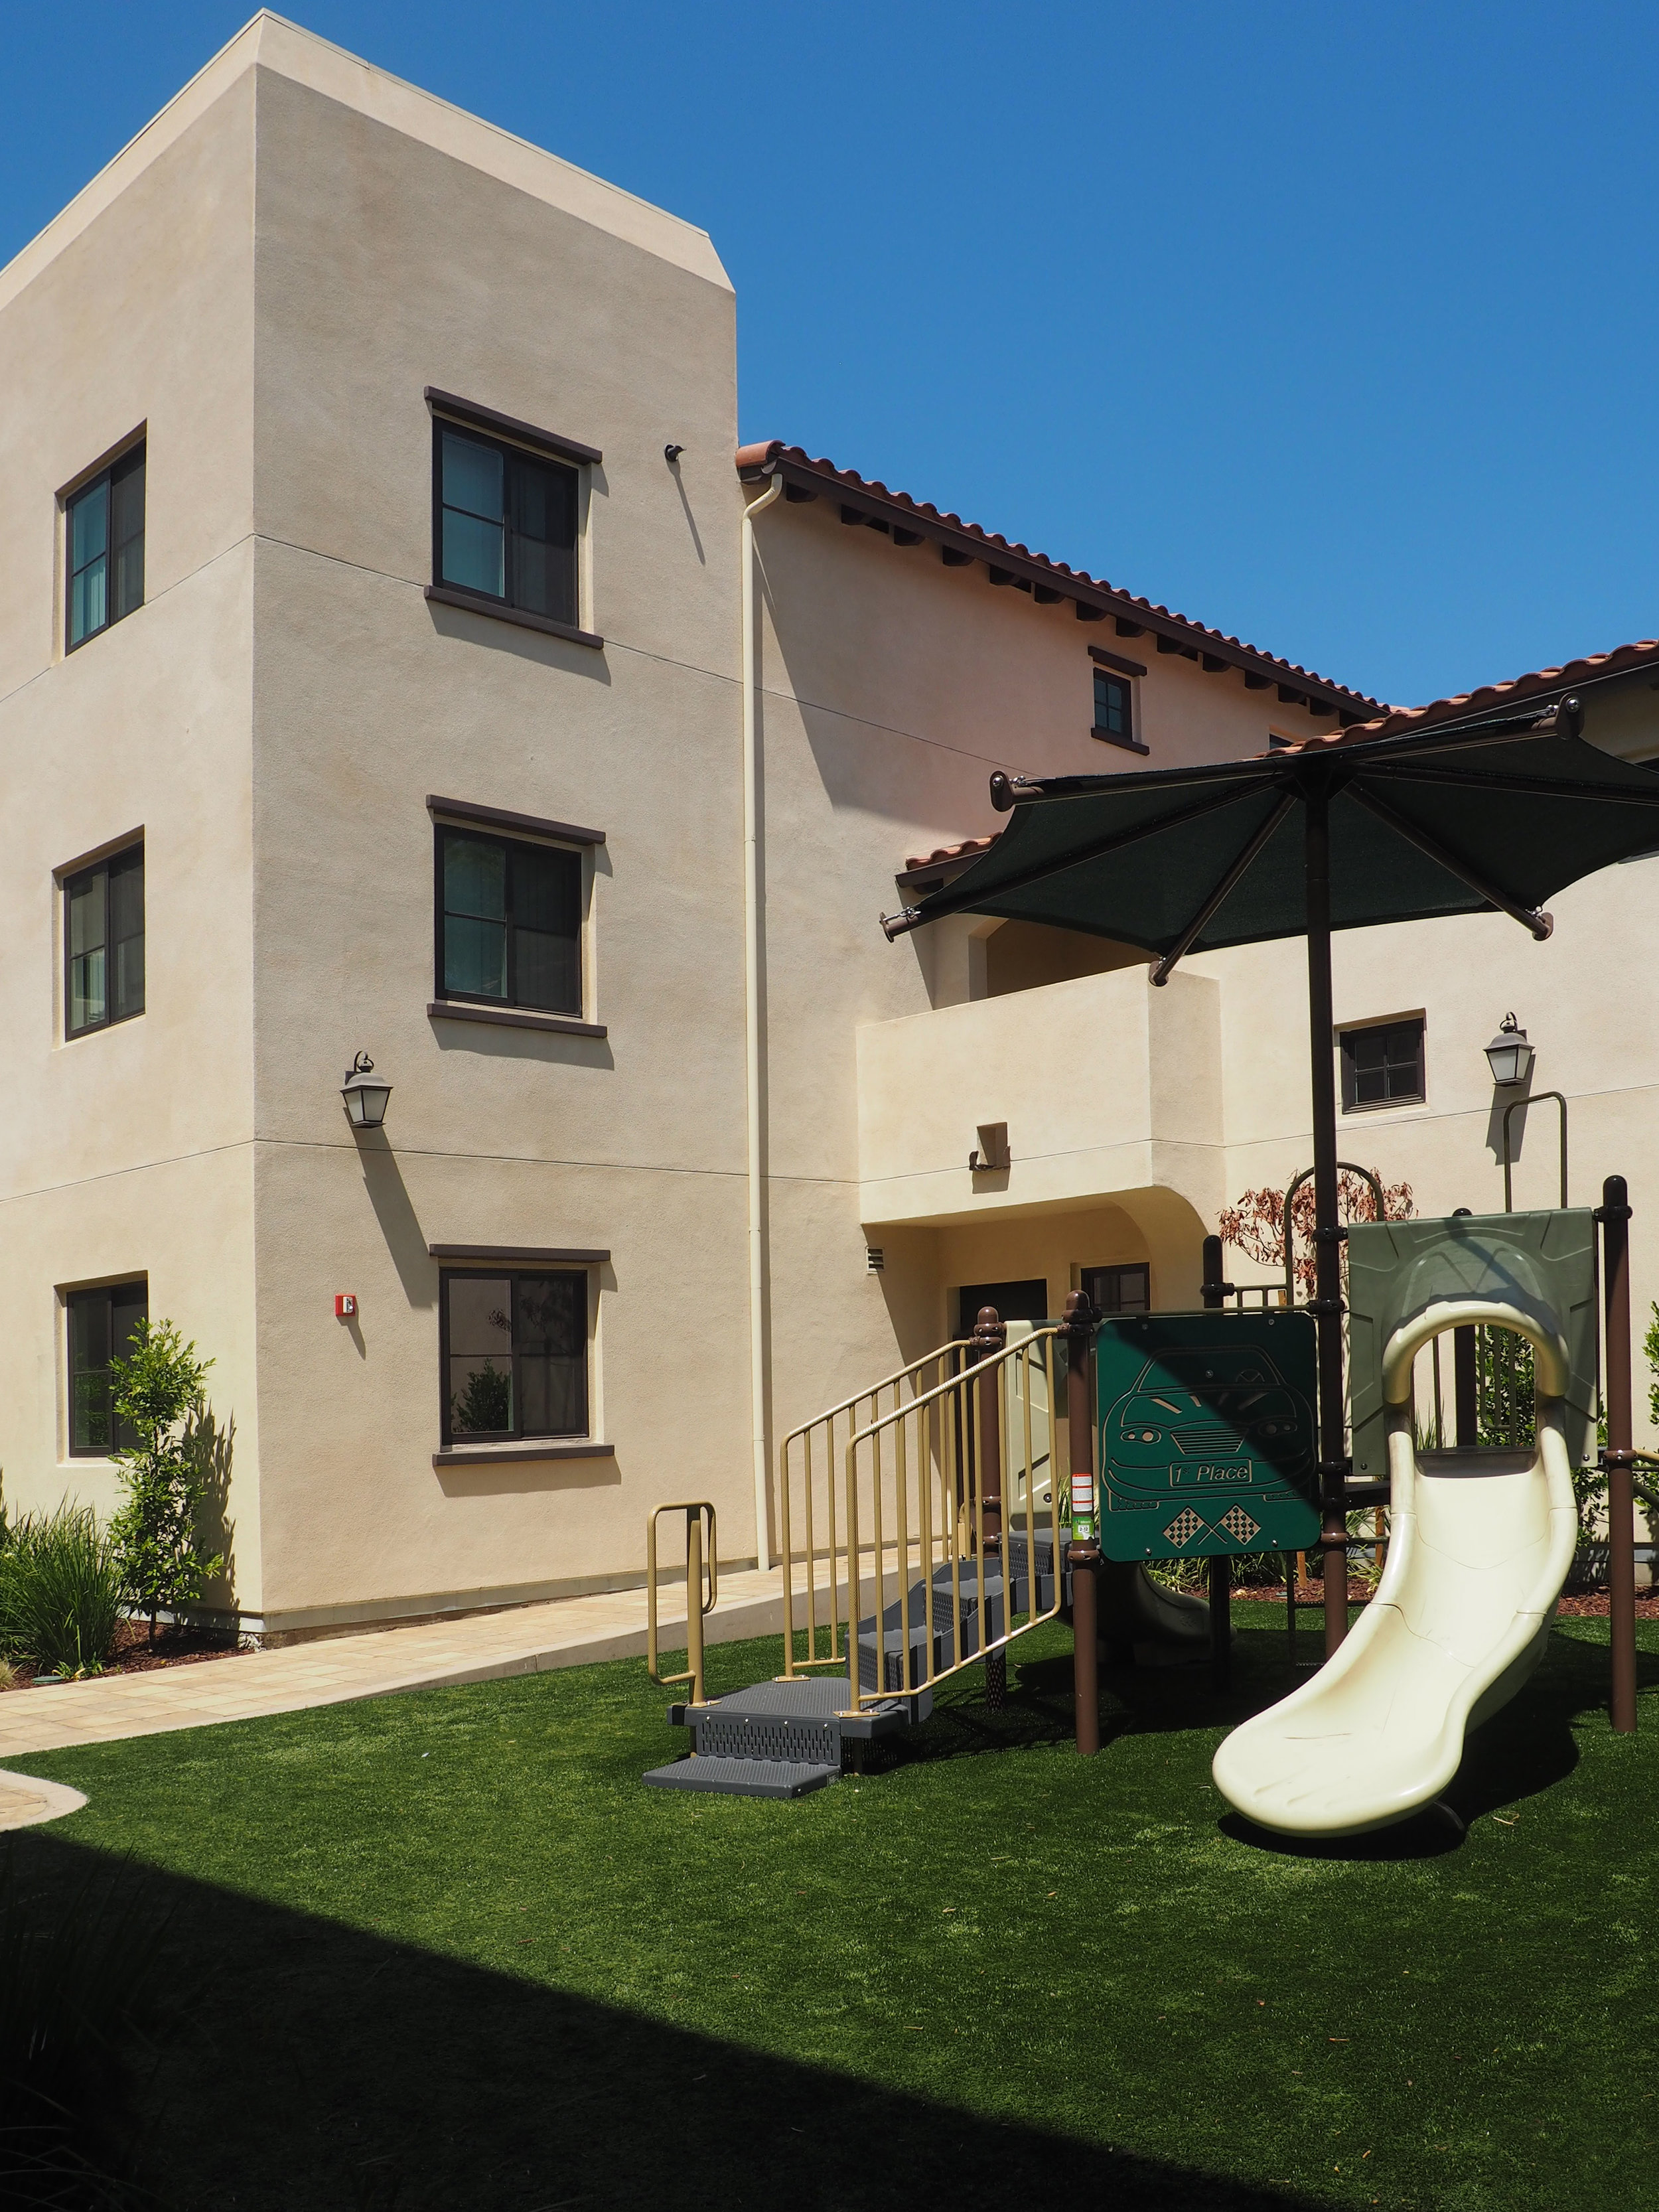 Playground and communal space at Marv's Place Apartments